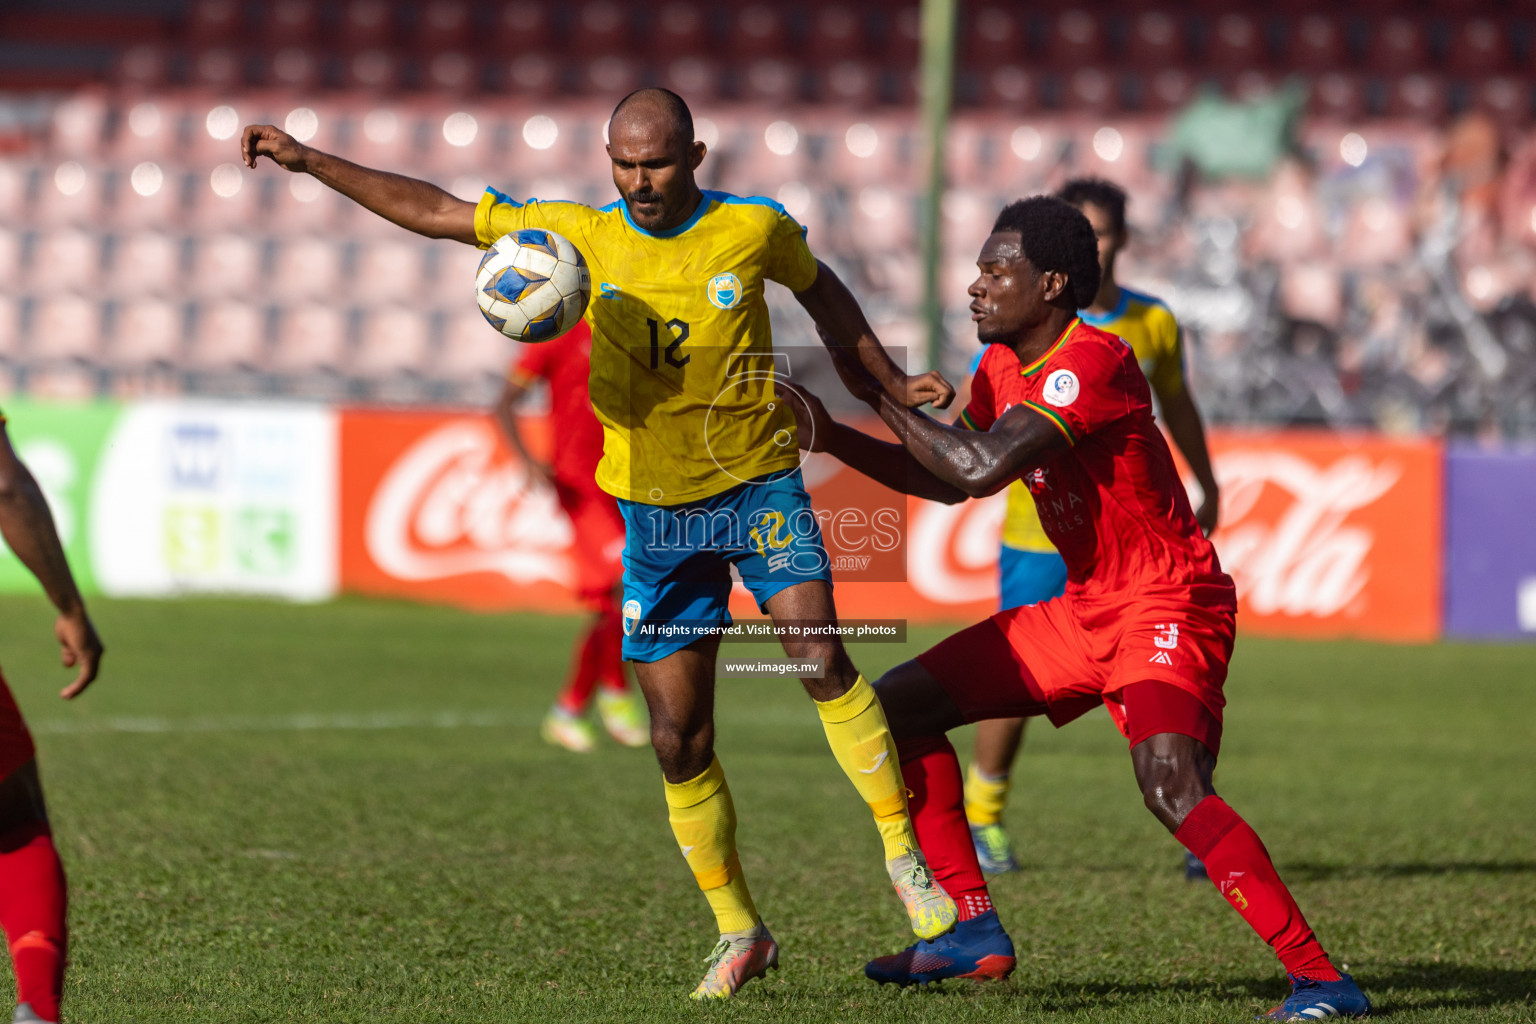 Club Valencia vs De Grande Sports Club in Ooredoo Dhivehi Premier League 2021/22 on 16th July 2022, held in National Football Stadium, Male', Maldives Photos: Hassan Simah/ Images mv